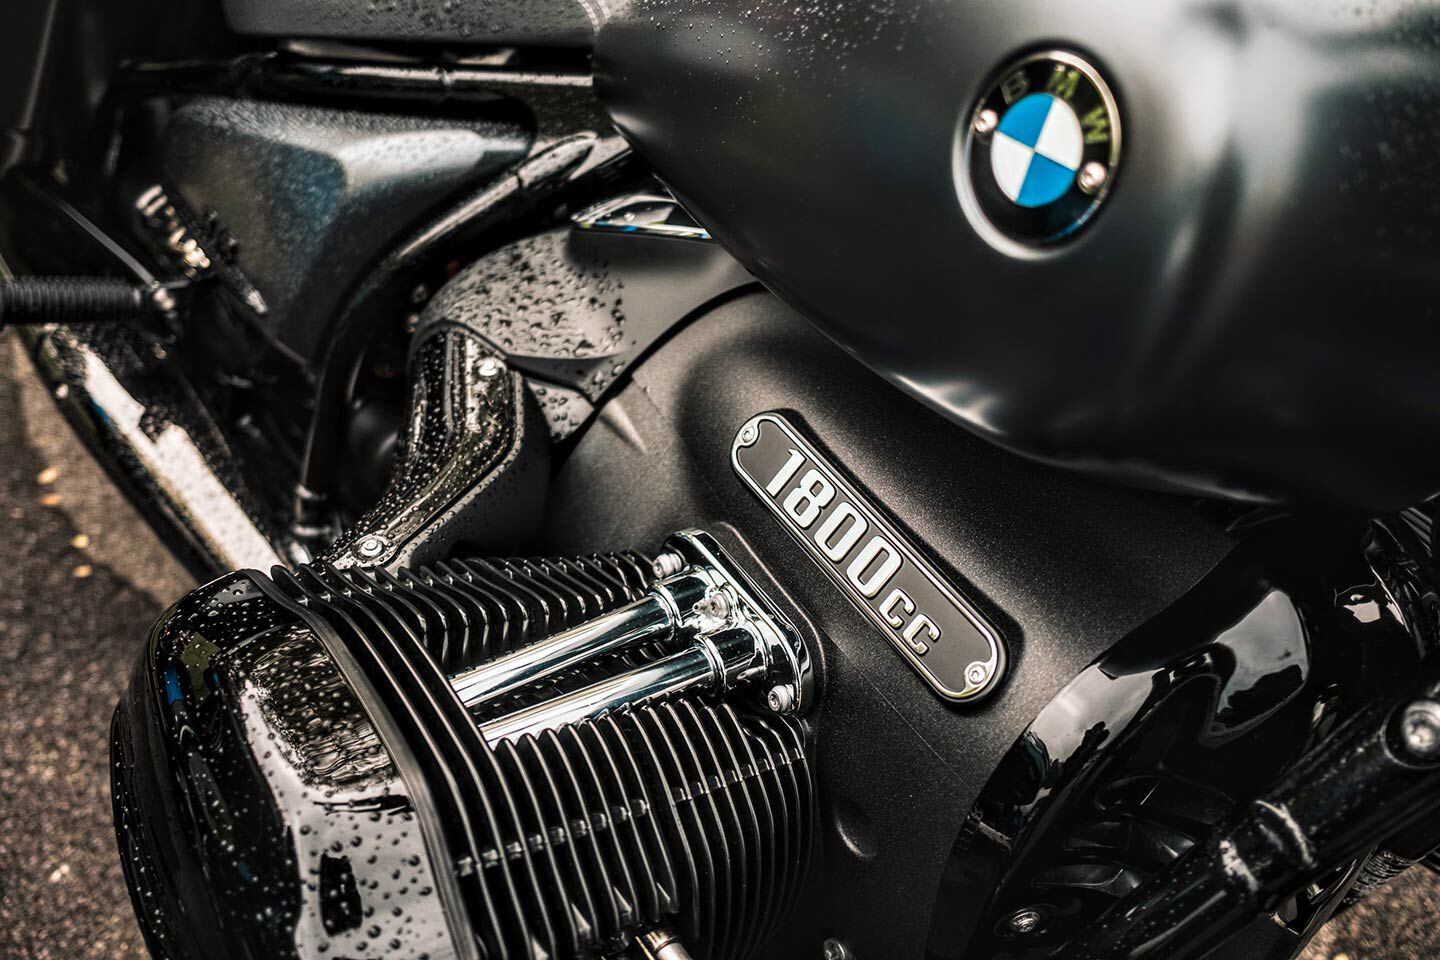 Twin pushrods bring both BMW heritage and classic American cruiser chops to the BMW R 18.